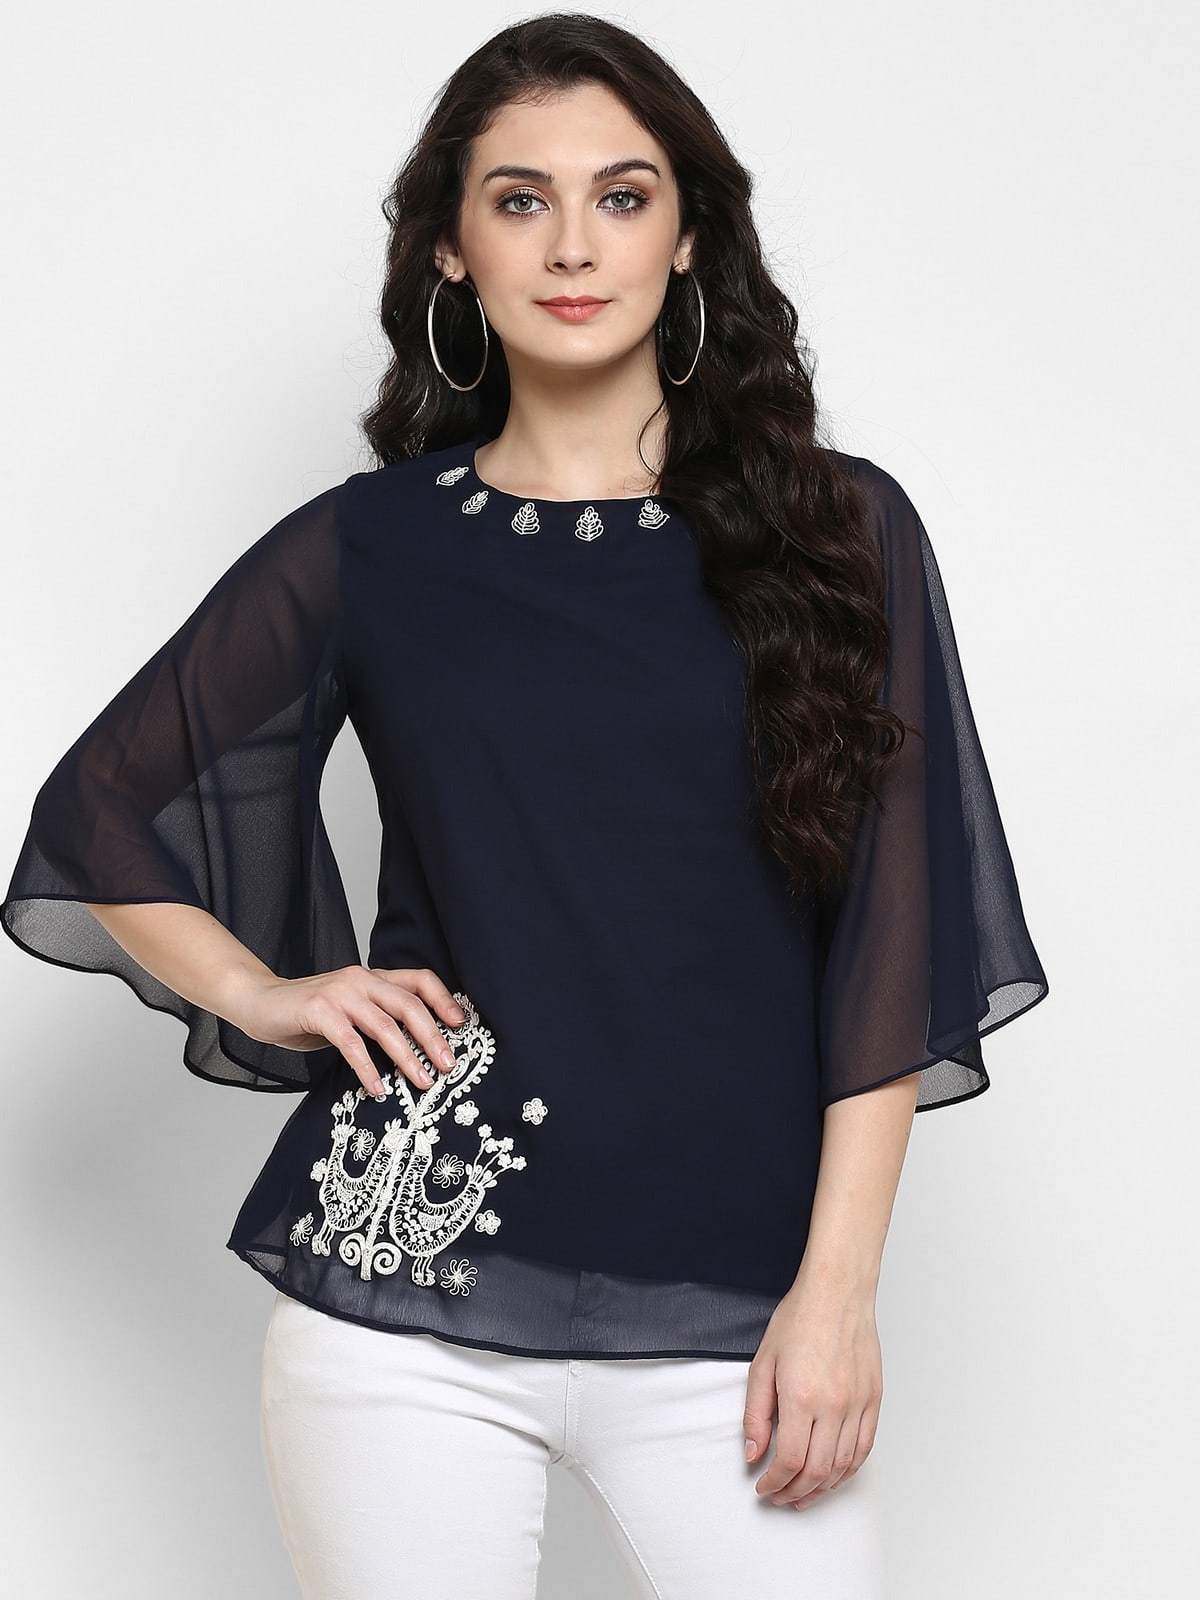 Women's Navy Blue Embroidered Sheer Top - Pannkh